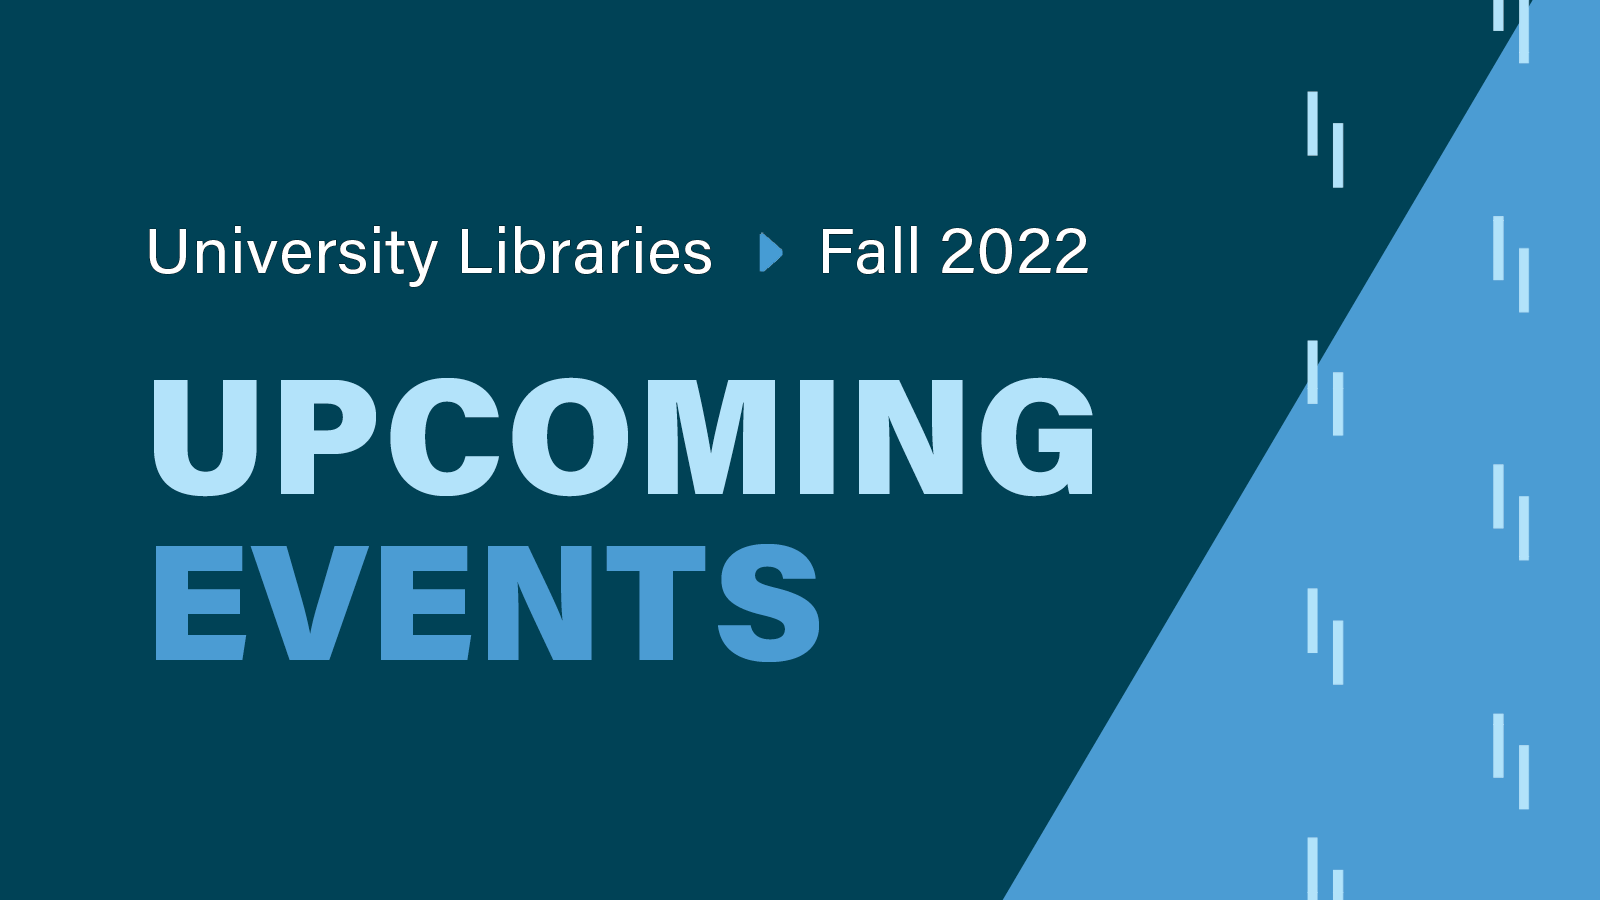 Join us for these fall 2022 events